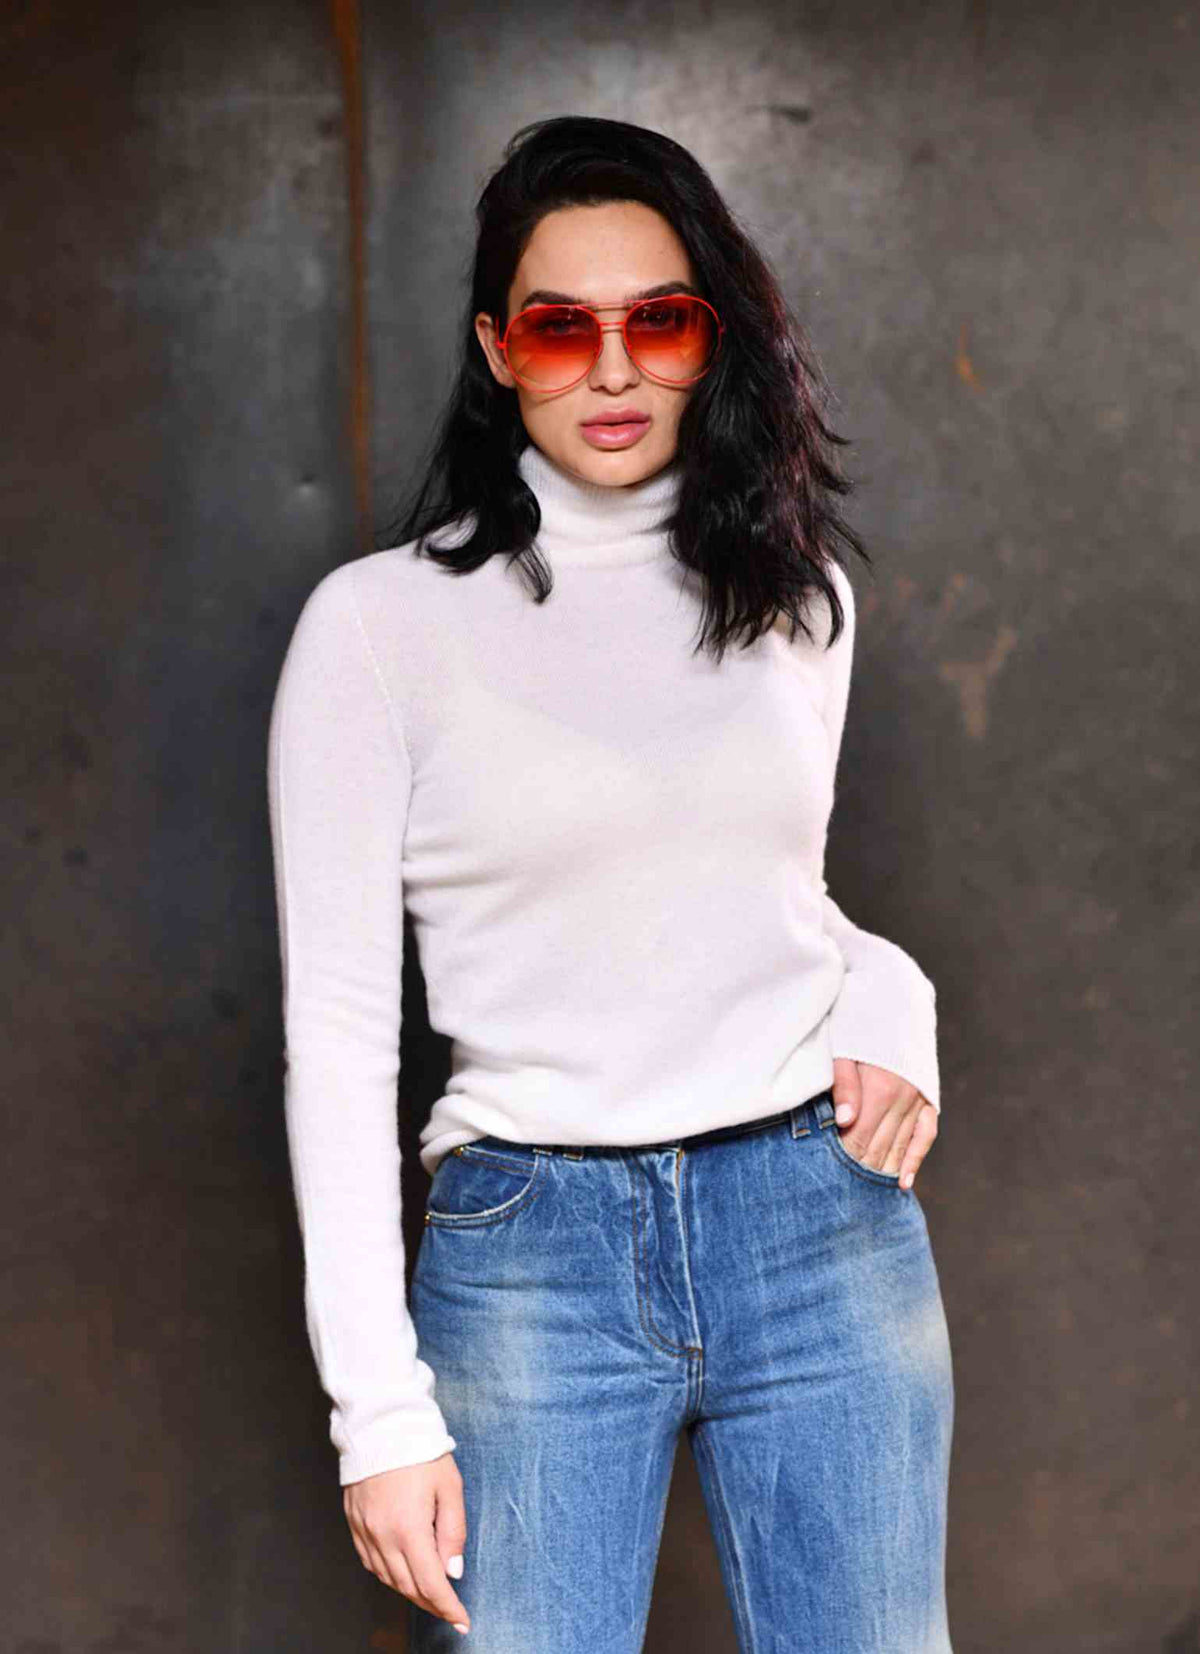 Women wearing turtleneck pure cashmere sweater in color white with jeans and sunglasses